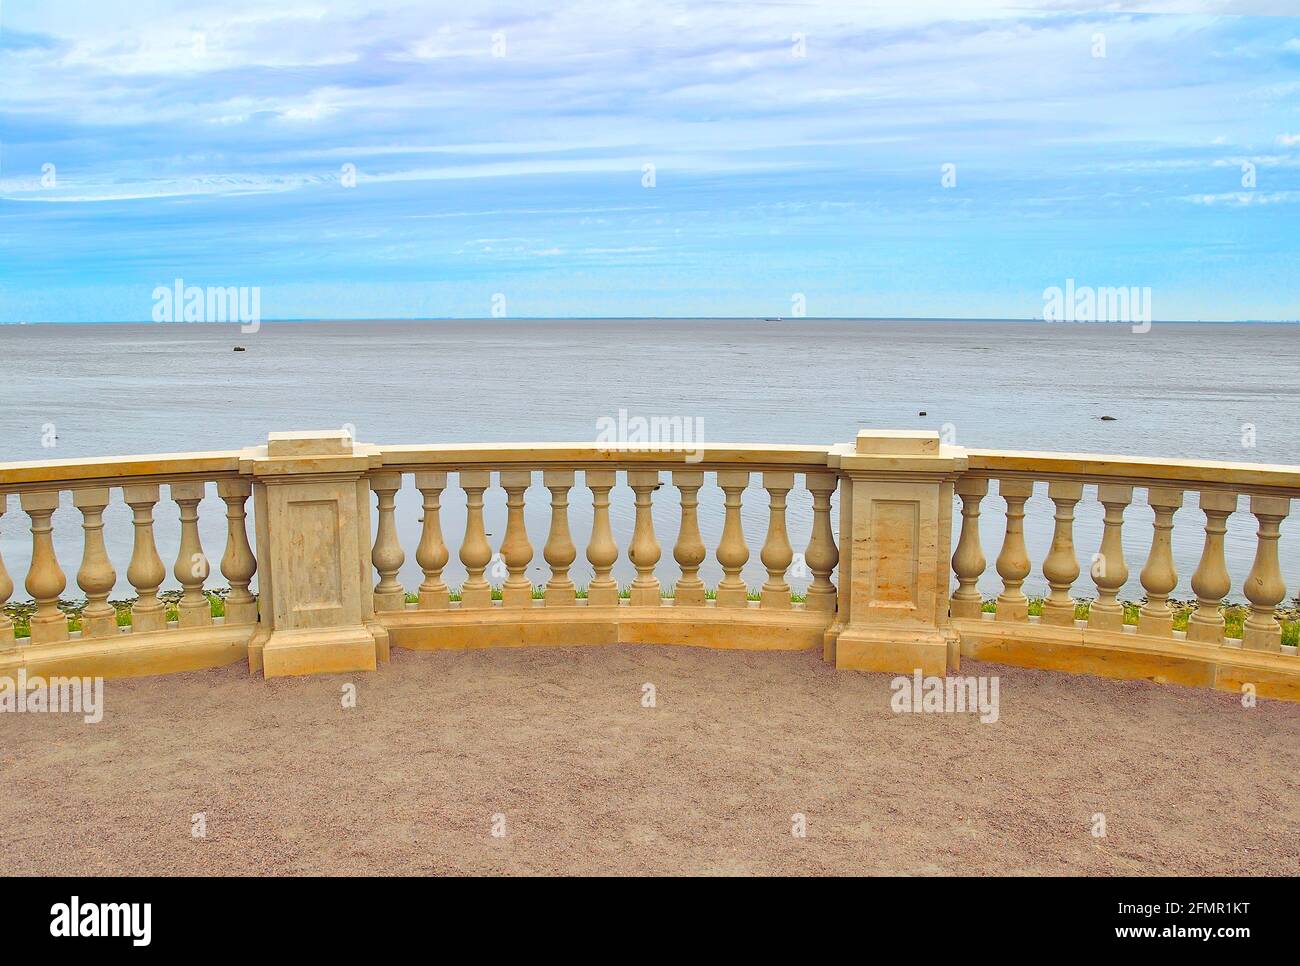 Gulf of Finland embankment in Peterhof, Saint Petersburg, Russia. View of Gulf of Finland of Baltic Sea and stony balustrade of seafront promenade, sa Stock Photo